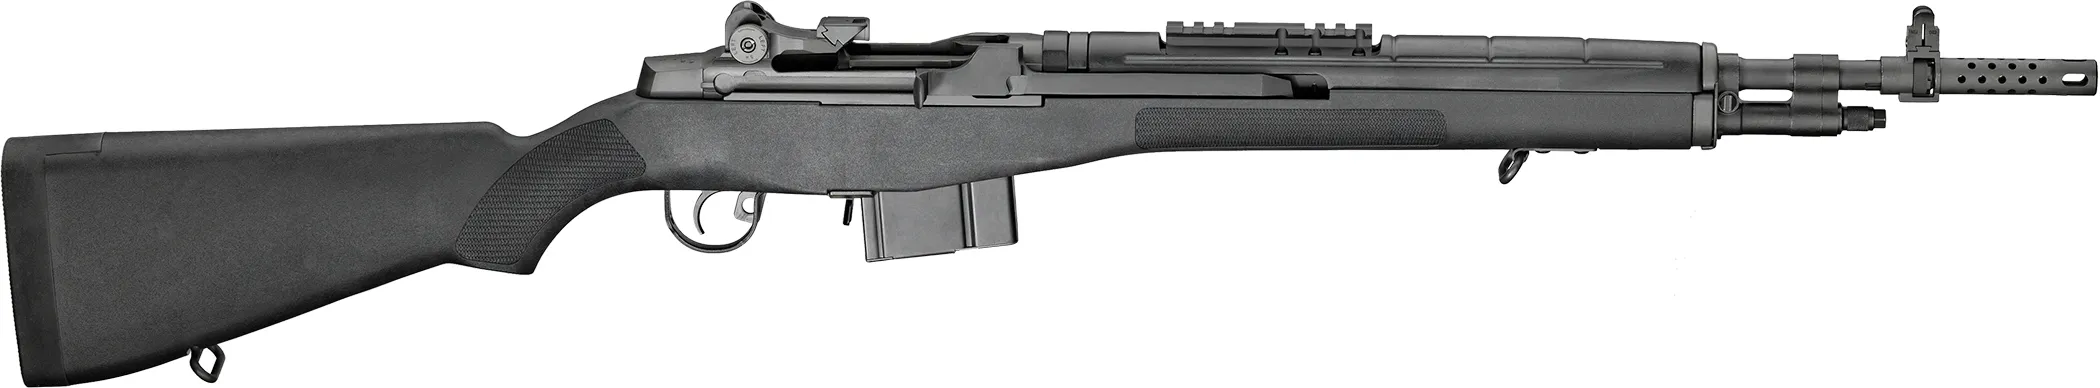 SPRINGFIELD ARMORY M1A SCOUT SQUAD